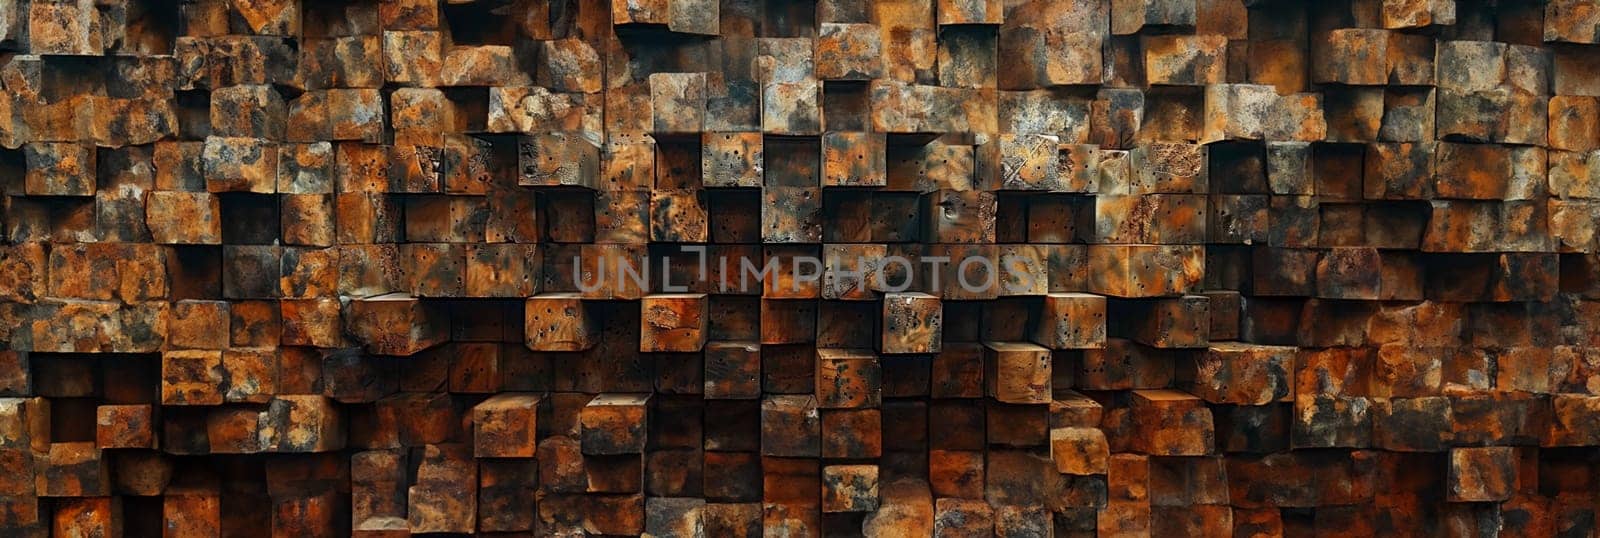 An abstract background composed of stacked, weathered wooden blocks in warm, earthy tones creating a textured, rustic pattern.